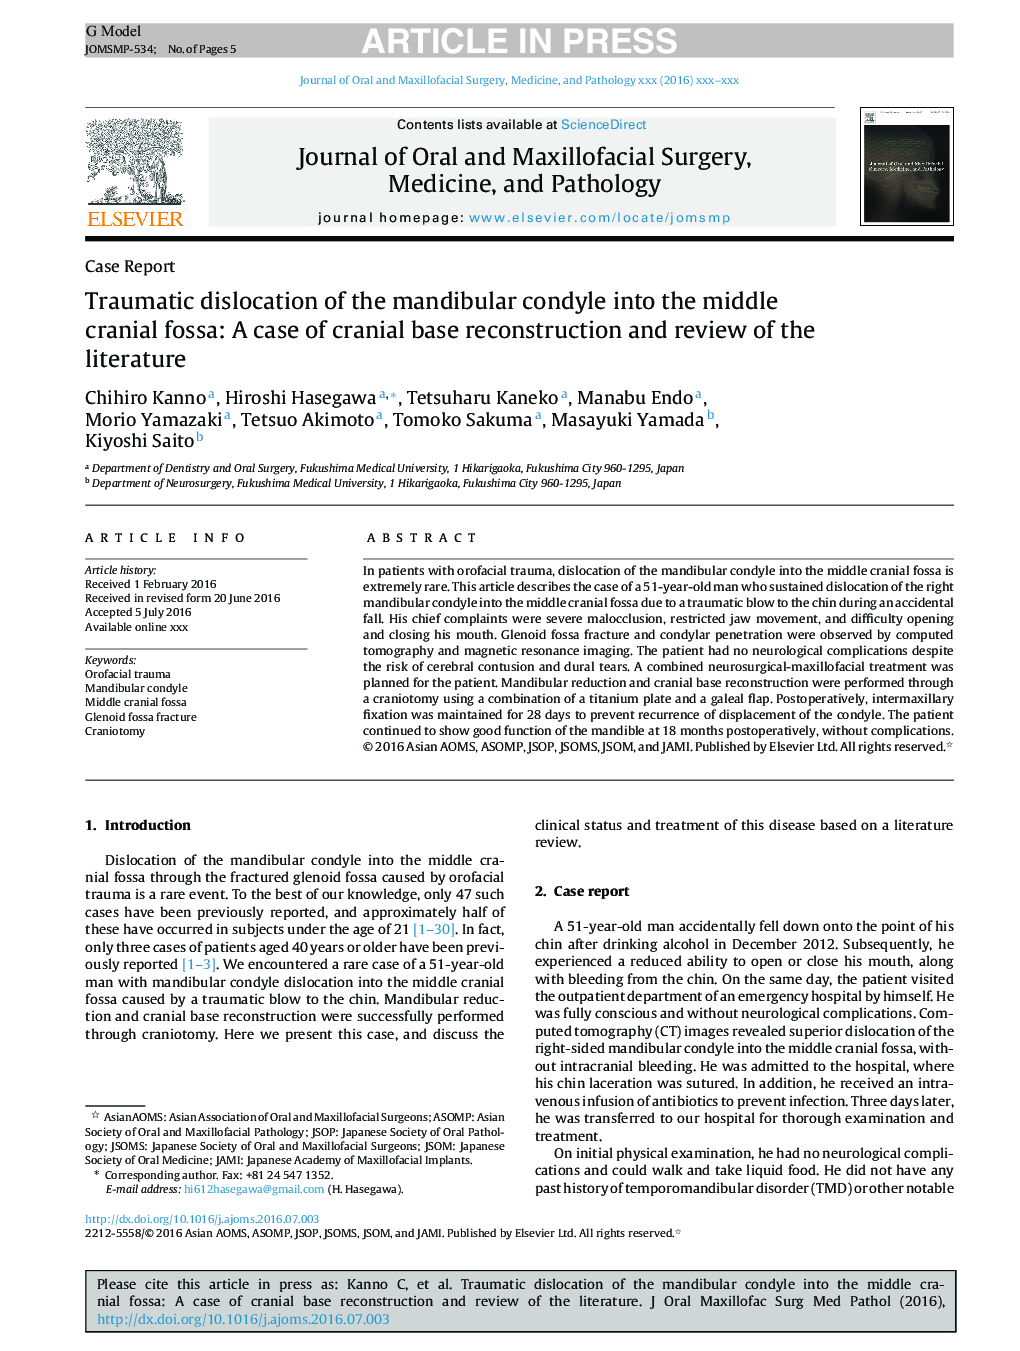 Traumatic dislocation of the mandibular condyle into the middle cranial fossa: A case of cranial base reconstruction and review of the literature